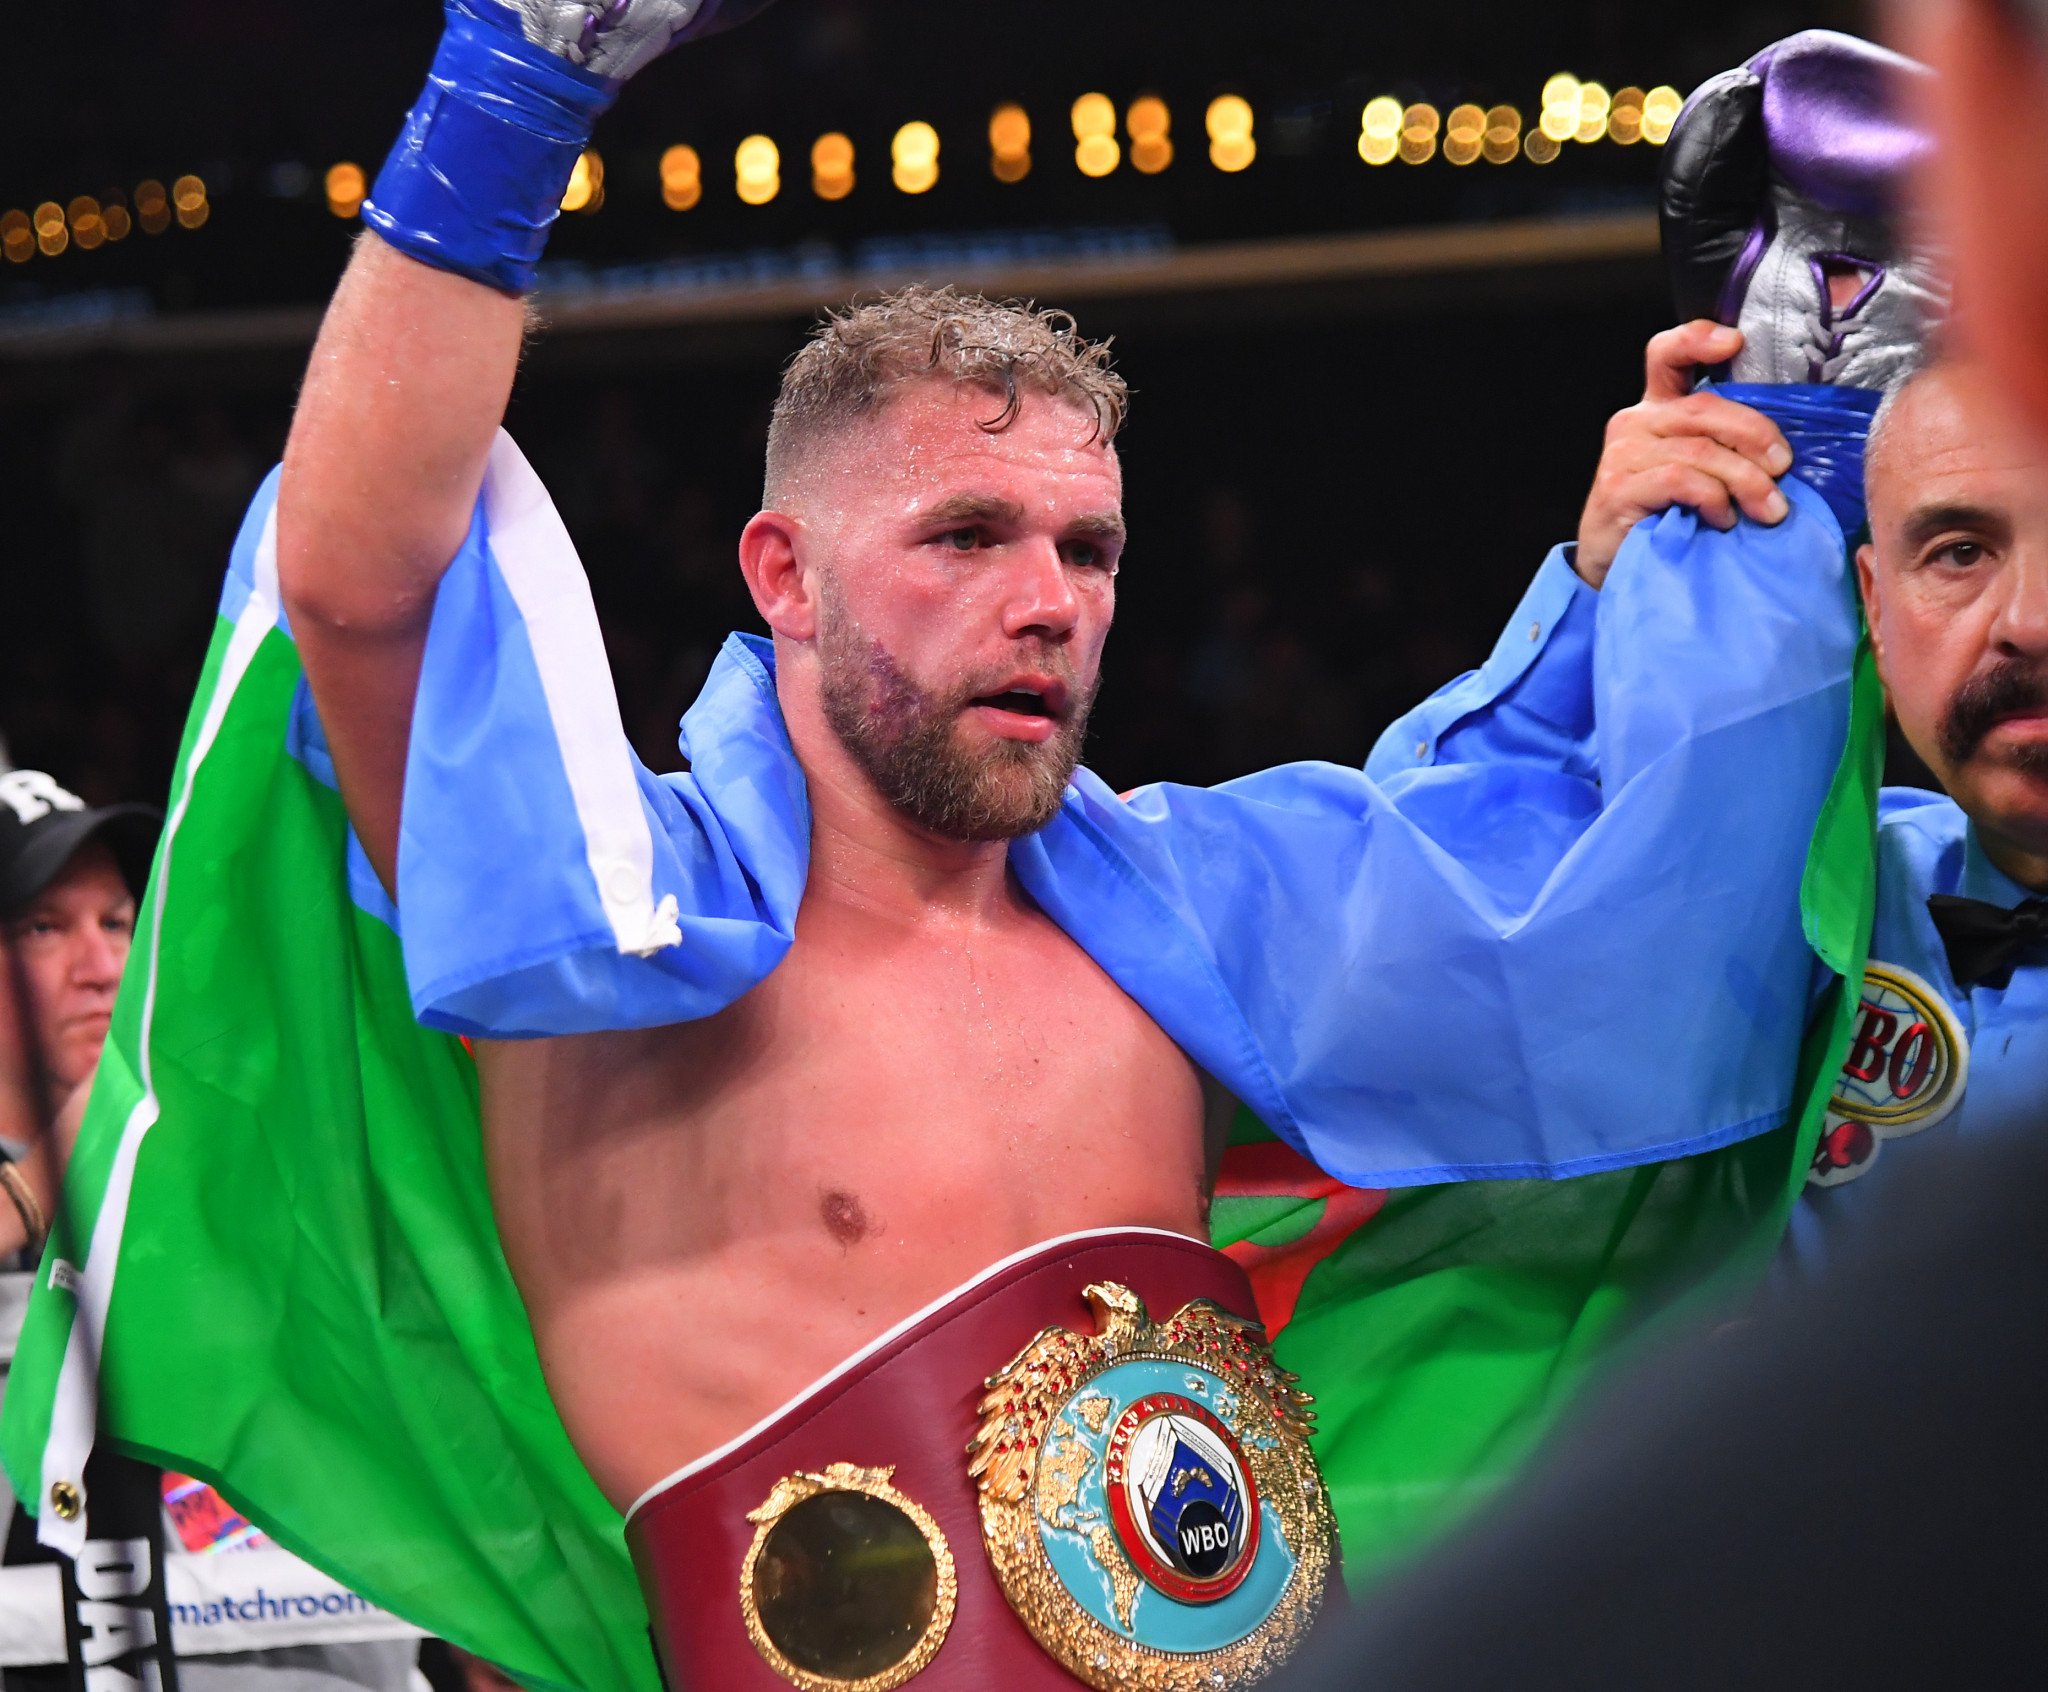 Billy Joe Saunders had his boxing licence suspended on Monday after appearing to encourage domestic violence ©Getty Images